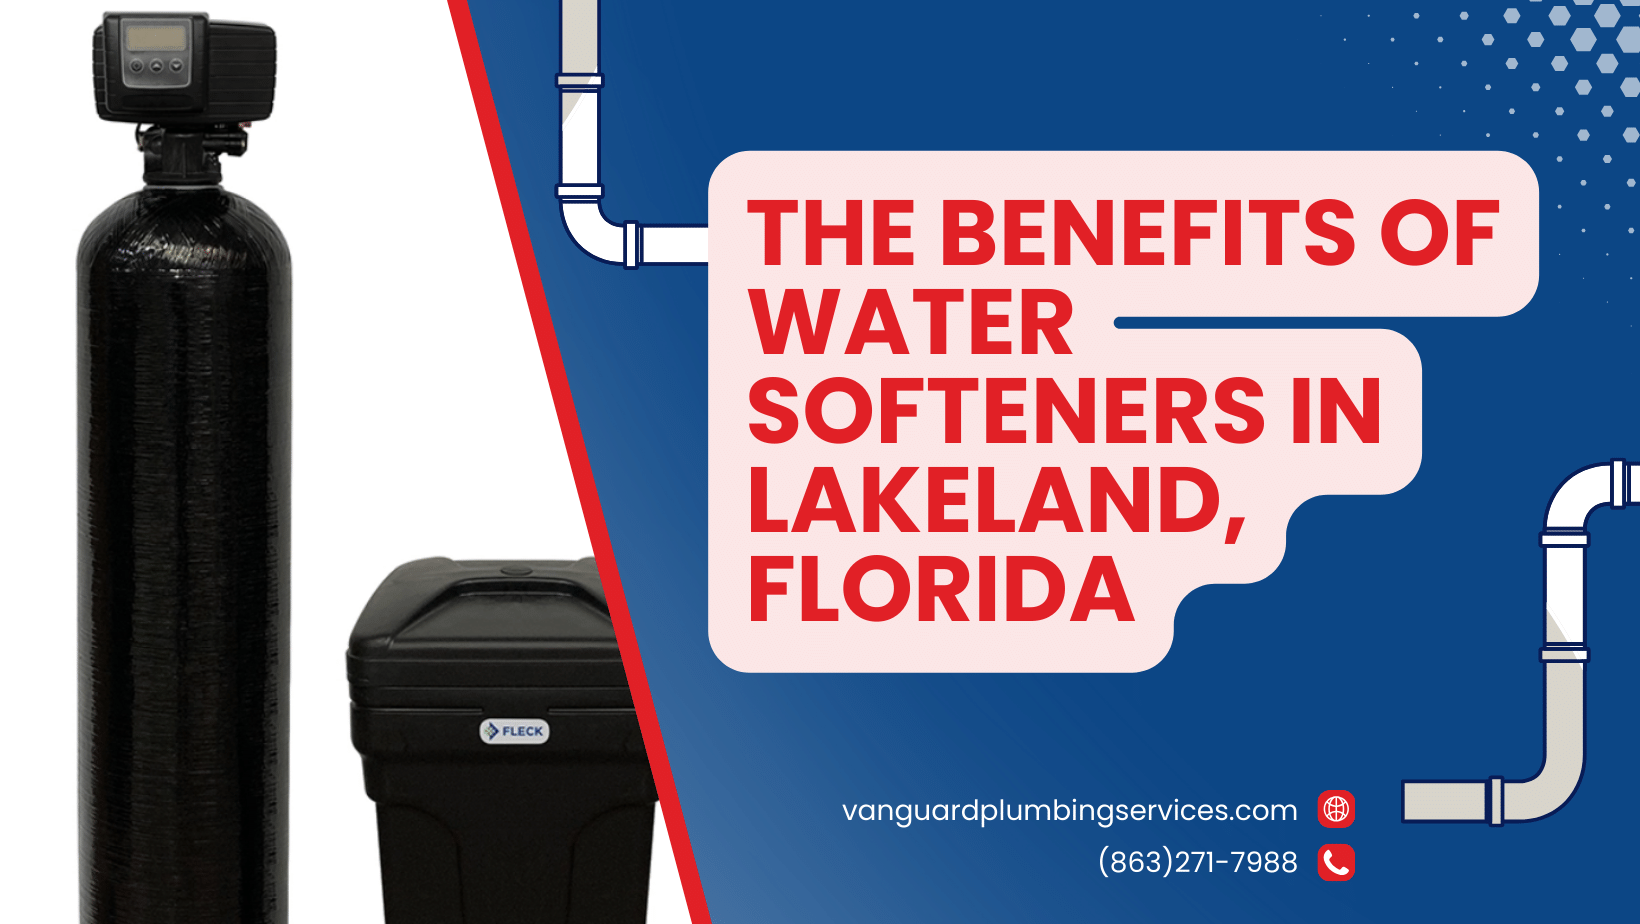 The Benefits of Water Softeners in Lakeland Florida